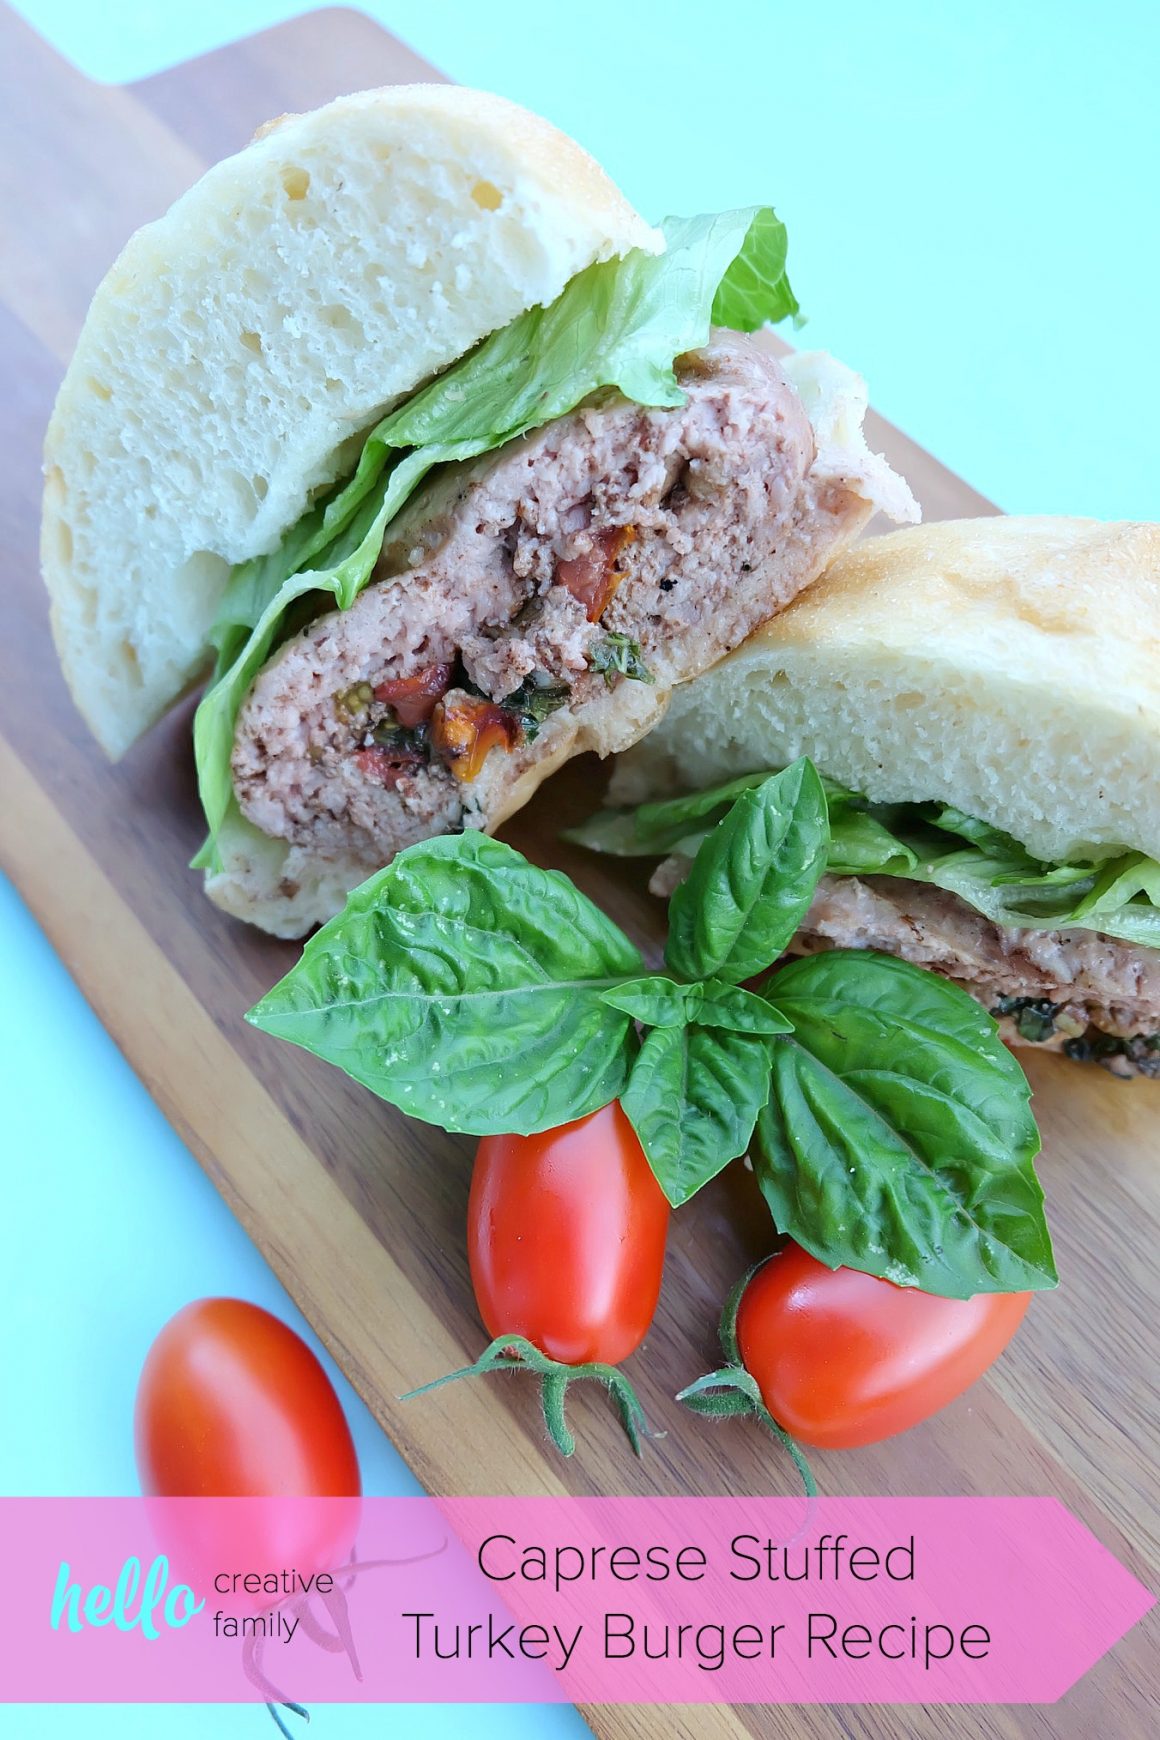 Fire up the BBQ and get out of the hot kitchen! This Caprese Stuffed Turkey Burger Recipe is filled with all of the flavors of summer. Juicy, flavorful and a healthy burger too! You'll feel good about feeding this easy 30 minute meal to your family! #Turkey #Burger #StuffedBurger #Recipe #Sponsored